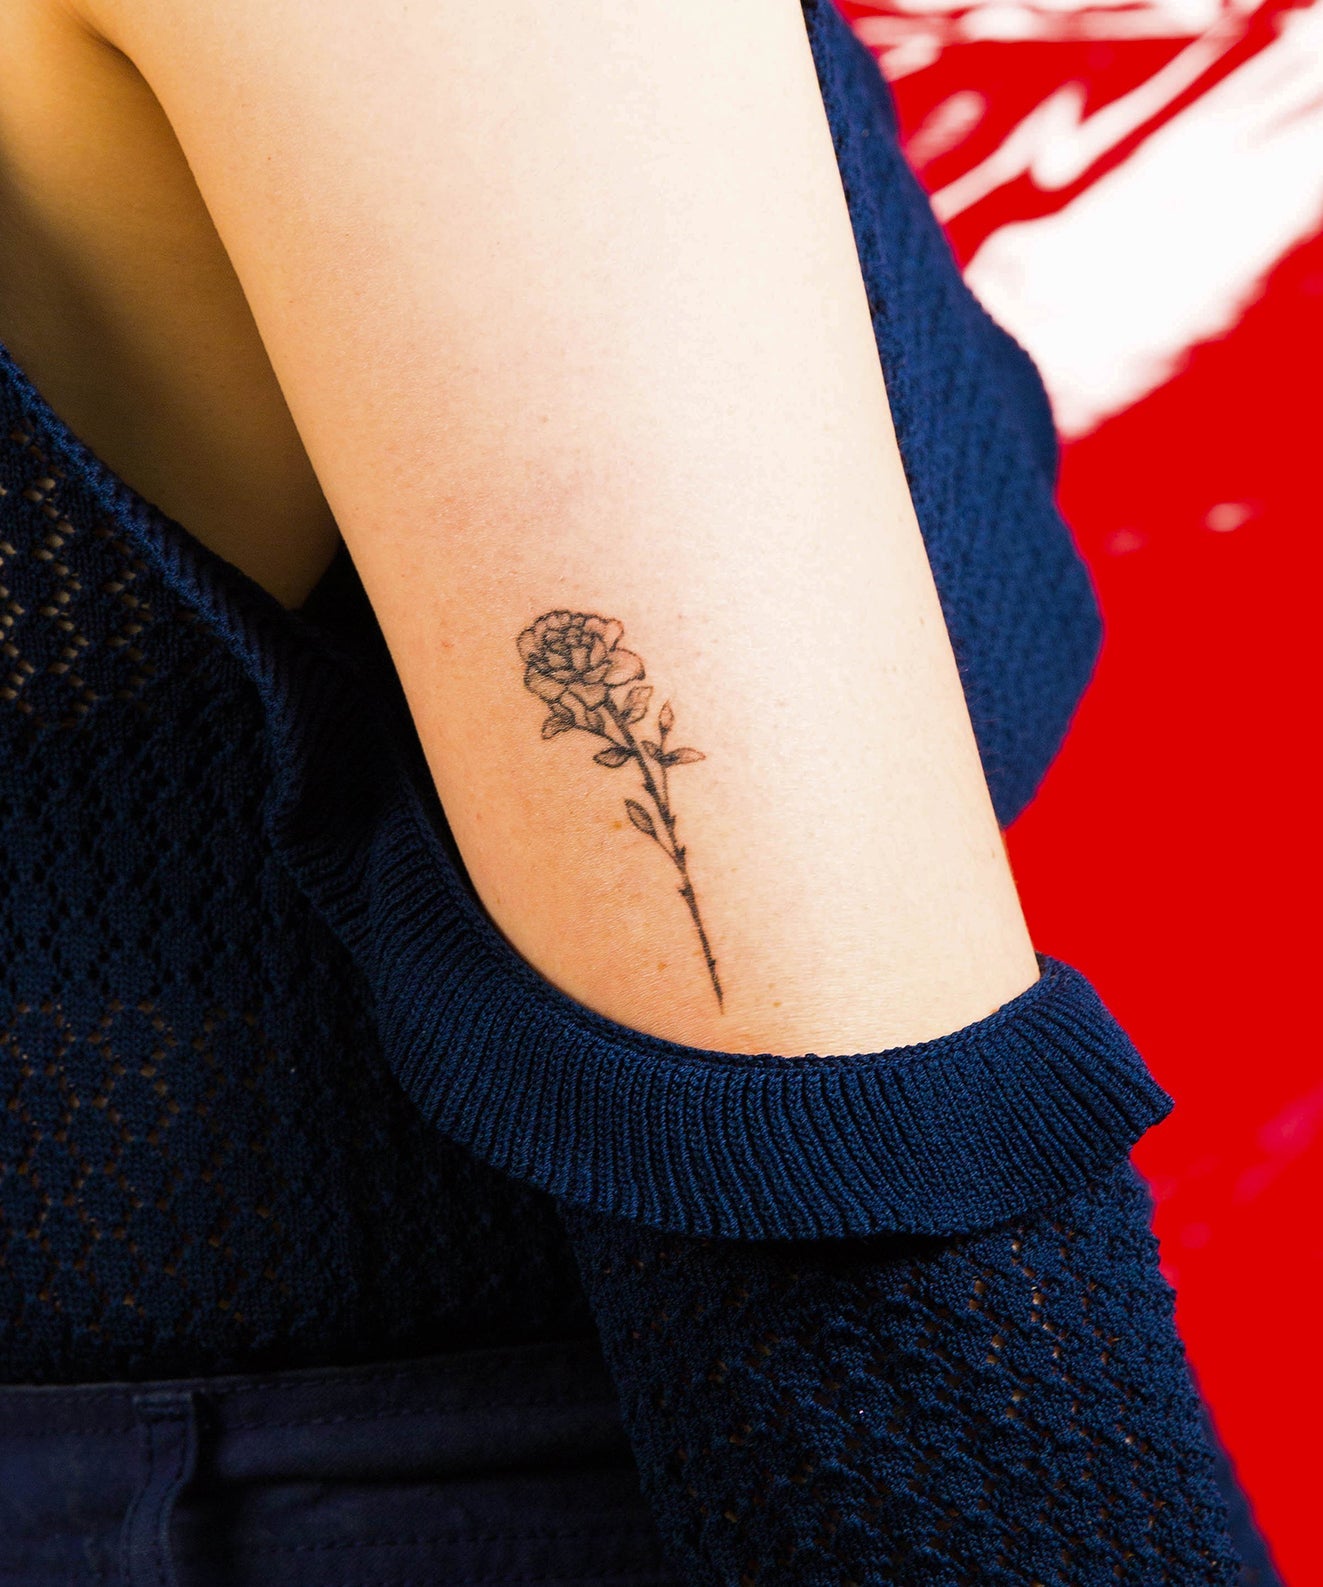 46 Cute Small Tattoos and Design Ideas by Celebrity Tattoo Artist JonBoy   Glamour